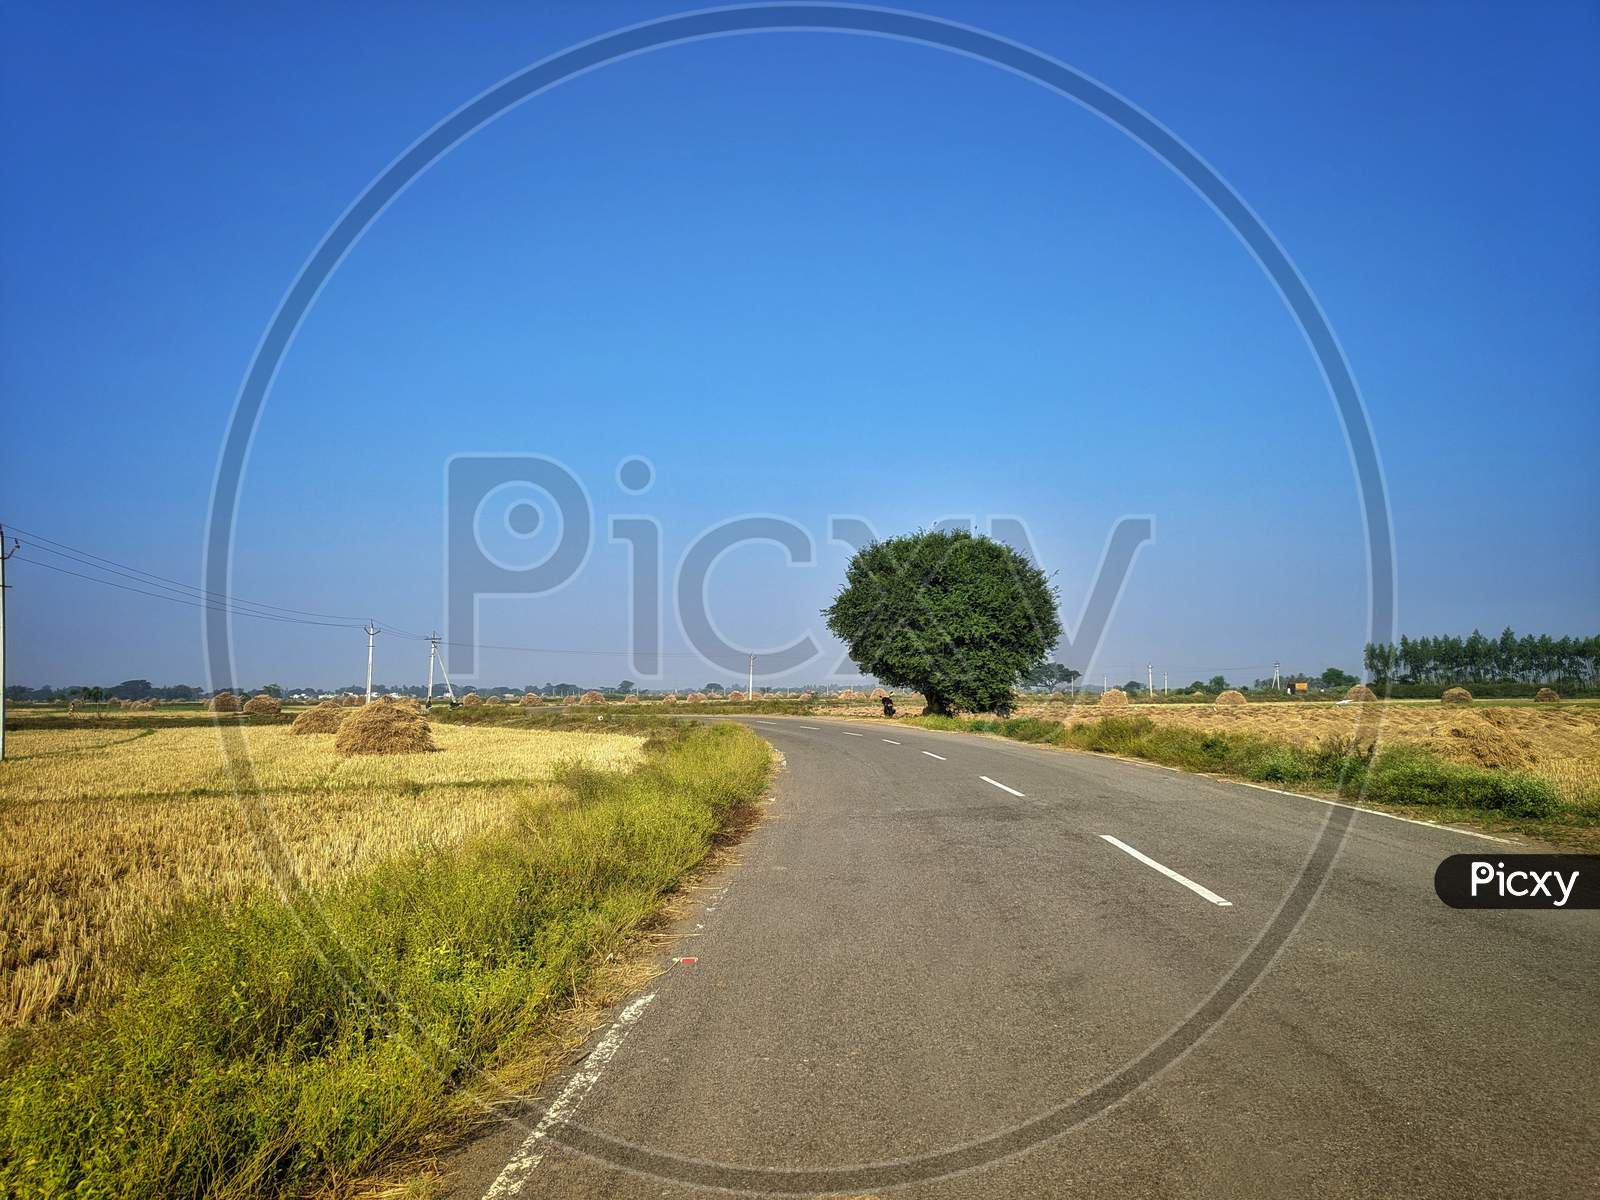 Rural Landscape With Trees And Country Road In India. Photo Was Taken On A Beautiful Sunny Day With And Clear Blue Sky.